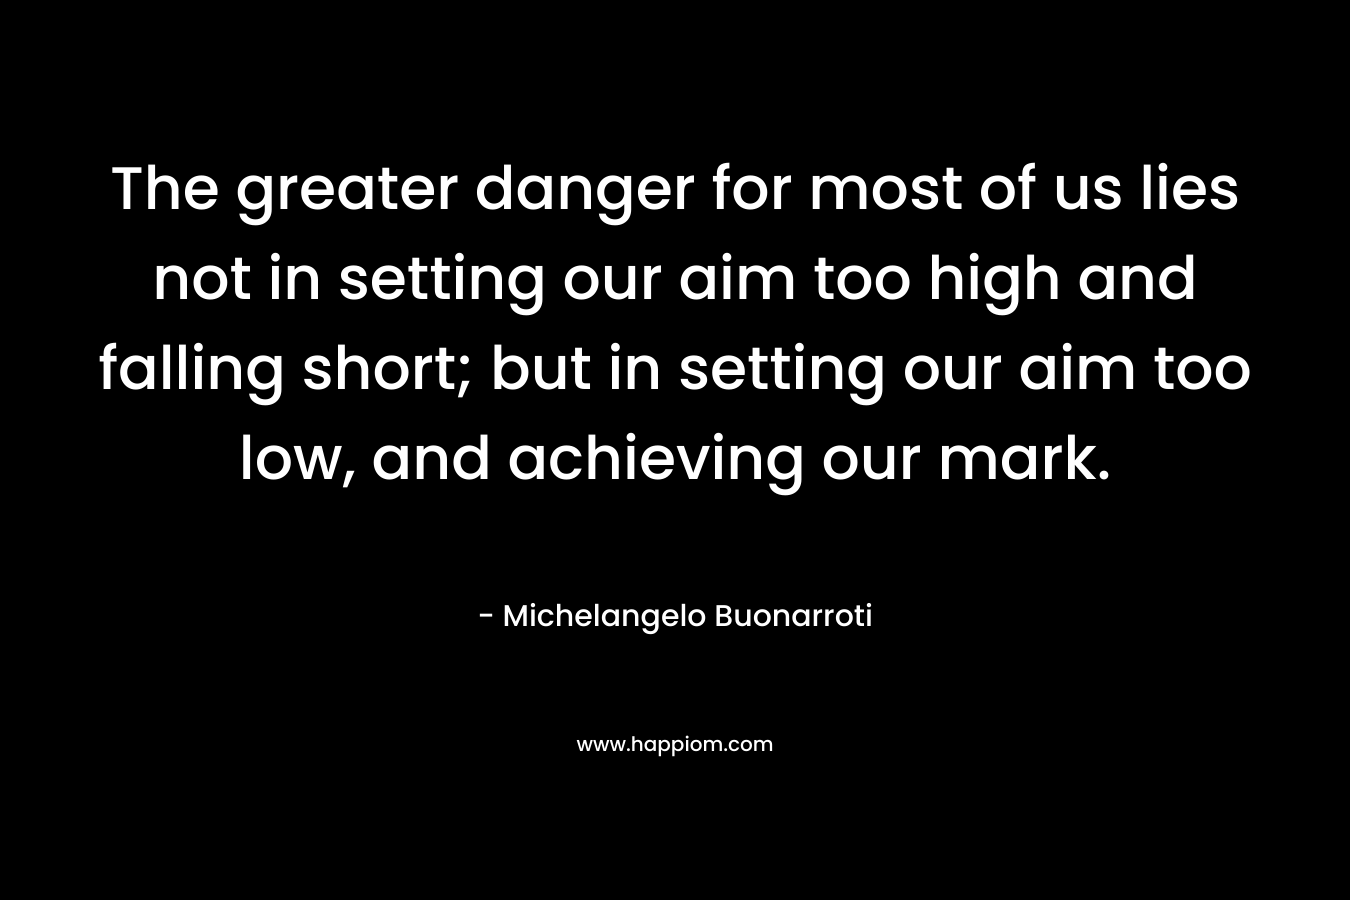 The greater danger for most of us lies not in setting our aim too high and falling short; but in setting our aim too low, and achieving our mark.